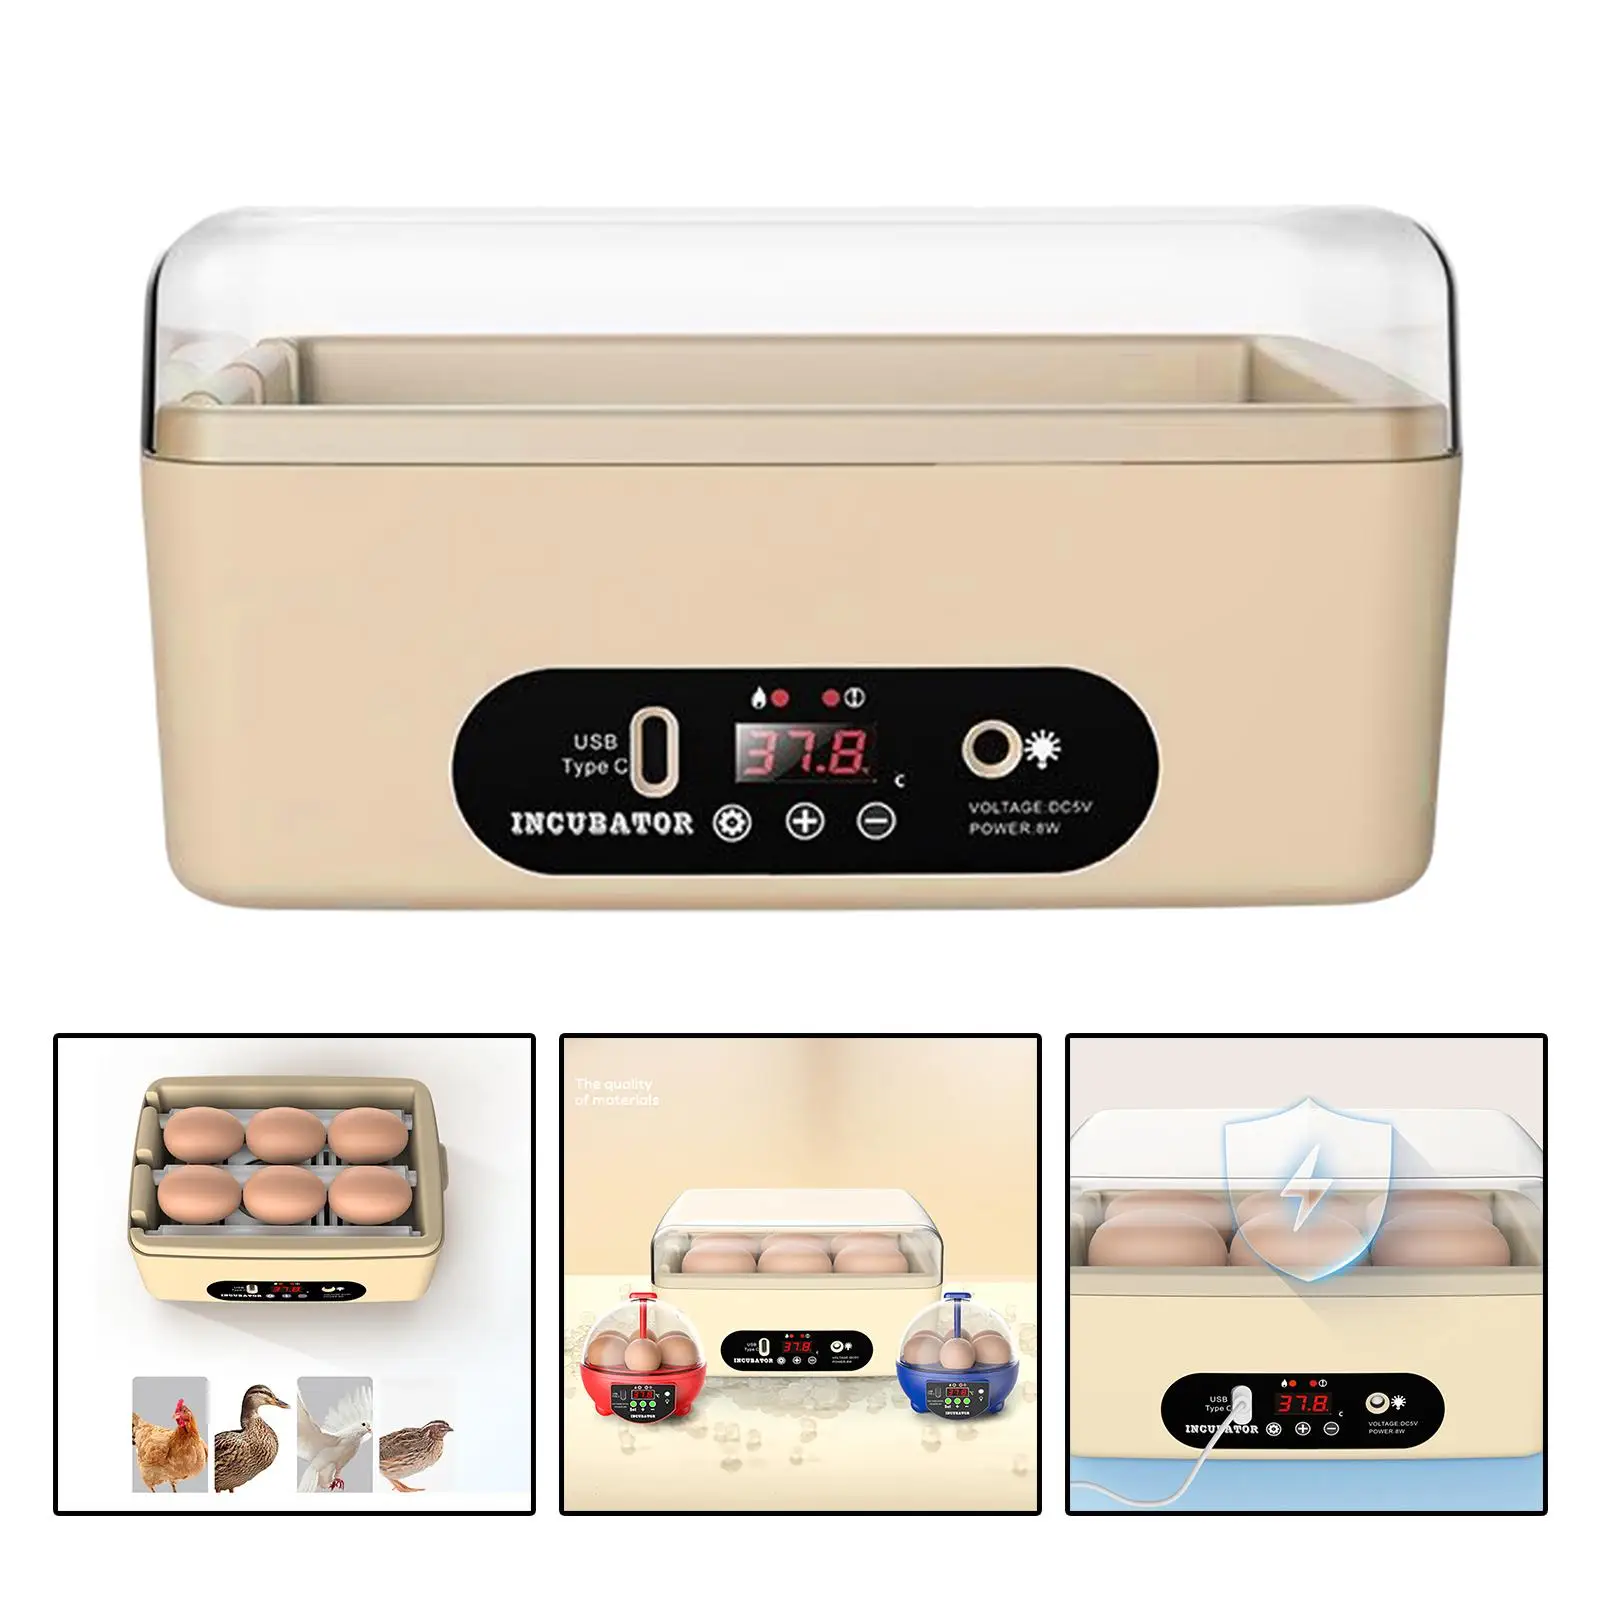 6 Eggs Incubator Automati Hatching Turner Tray Egg Hatcher Temperature Control Small Egg Hatcher Machine for Duck